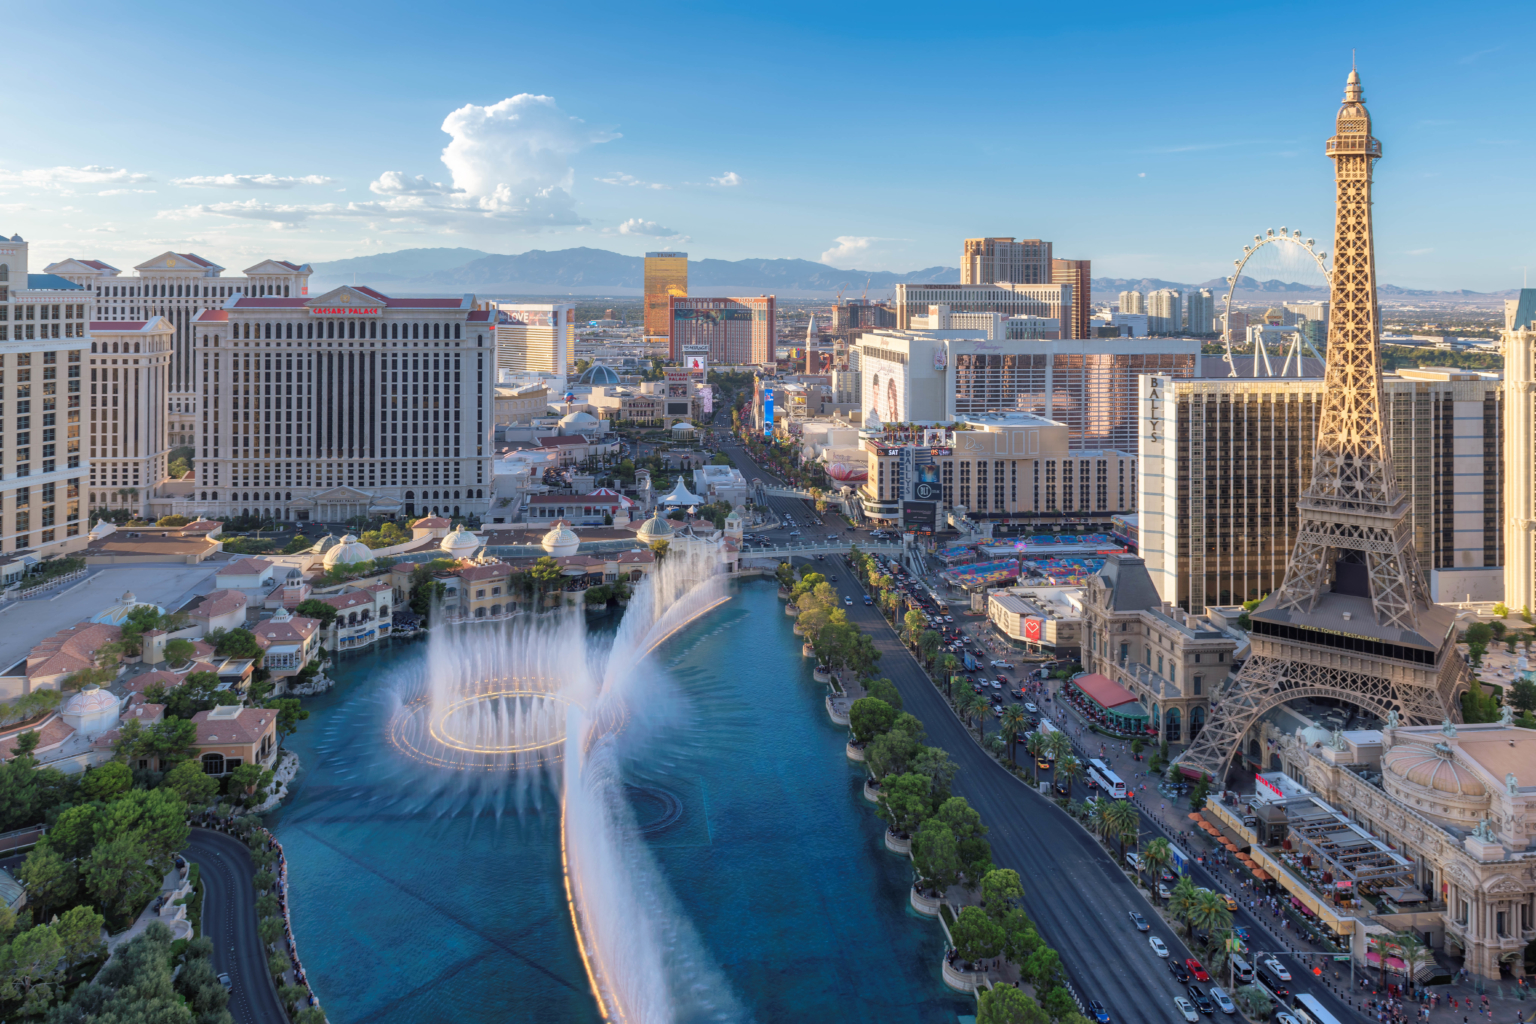 Las Vegas strip and Bellagio fountain show at sunset